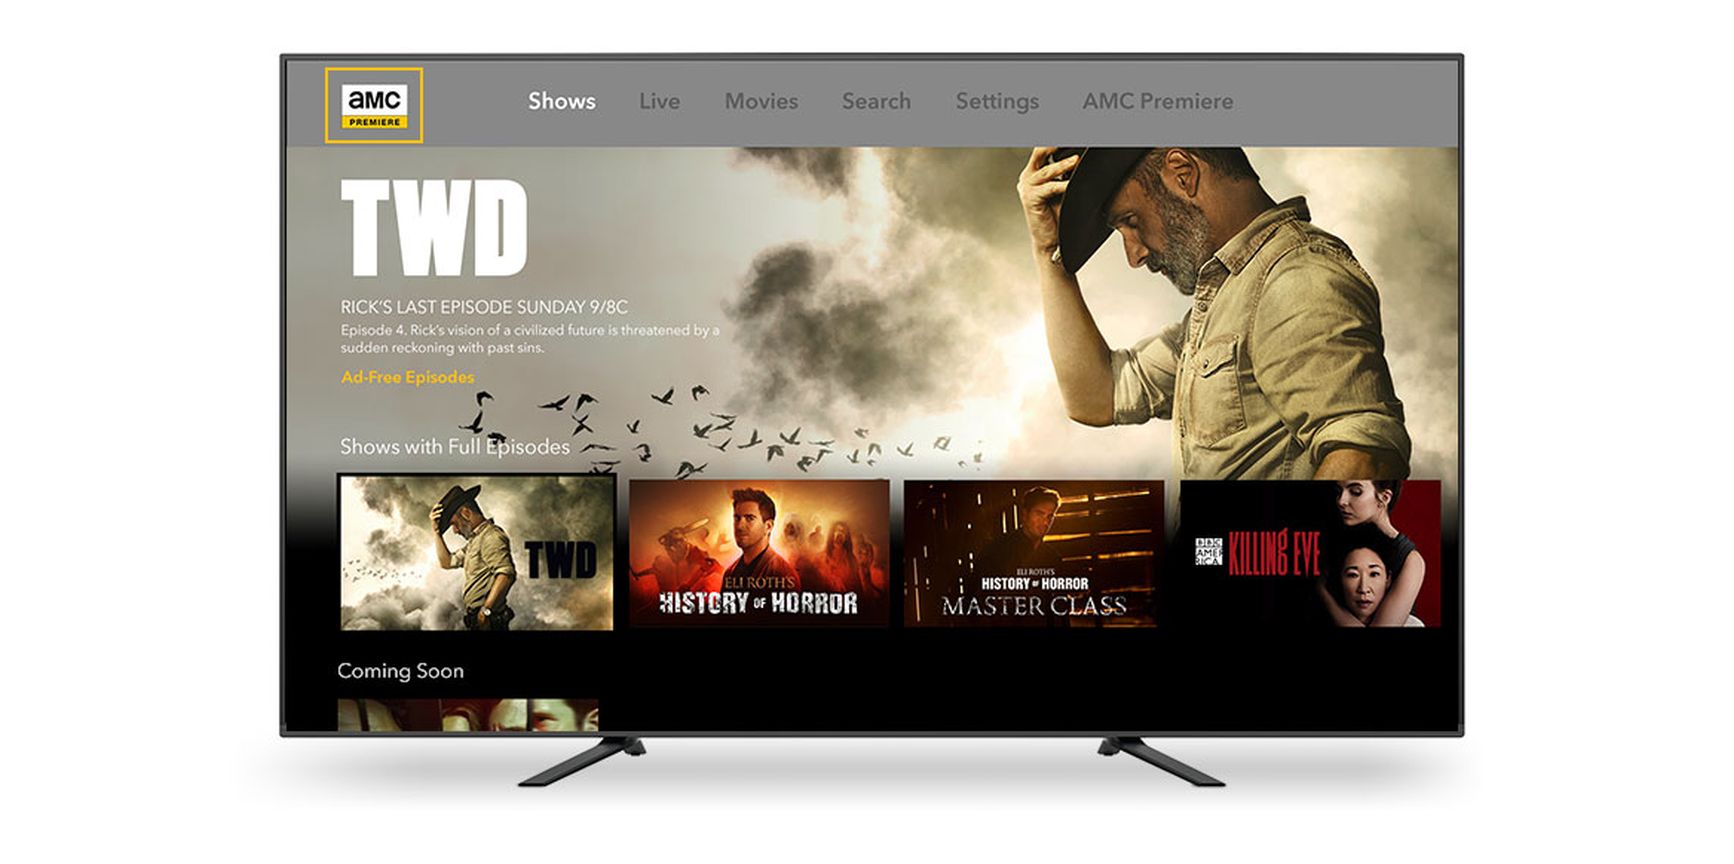 How To Watch Amc Plus On Smart TV